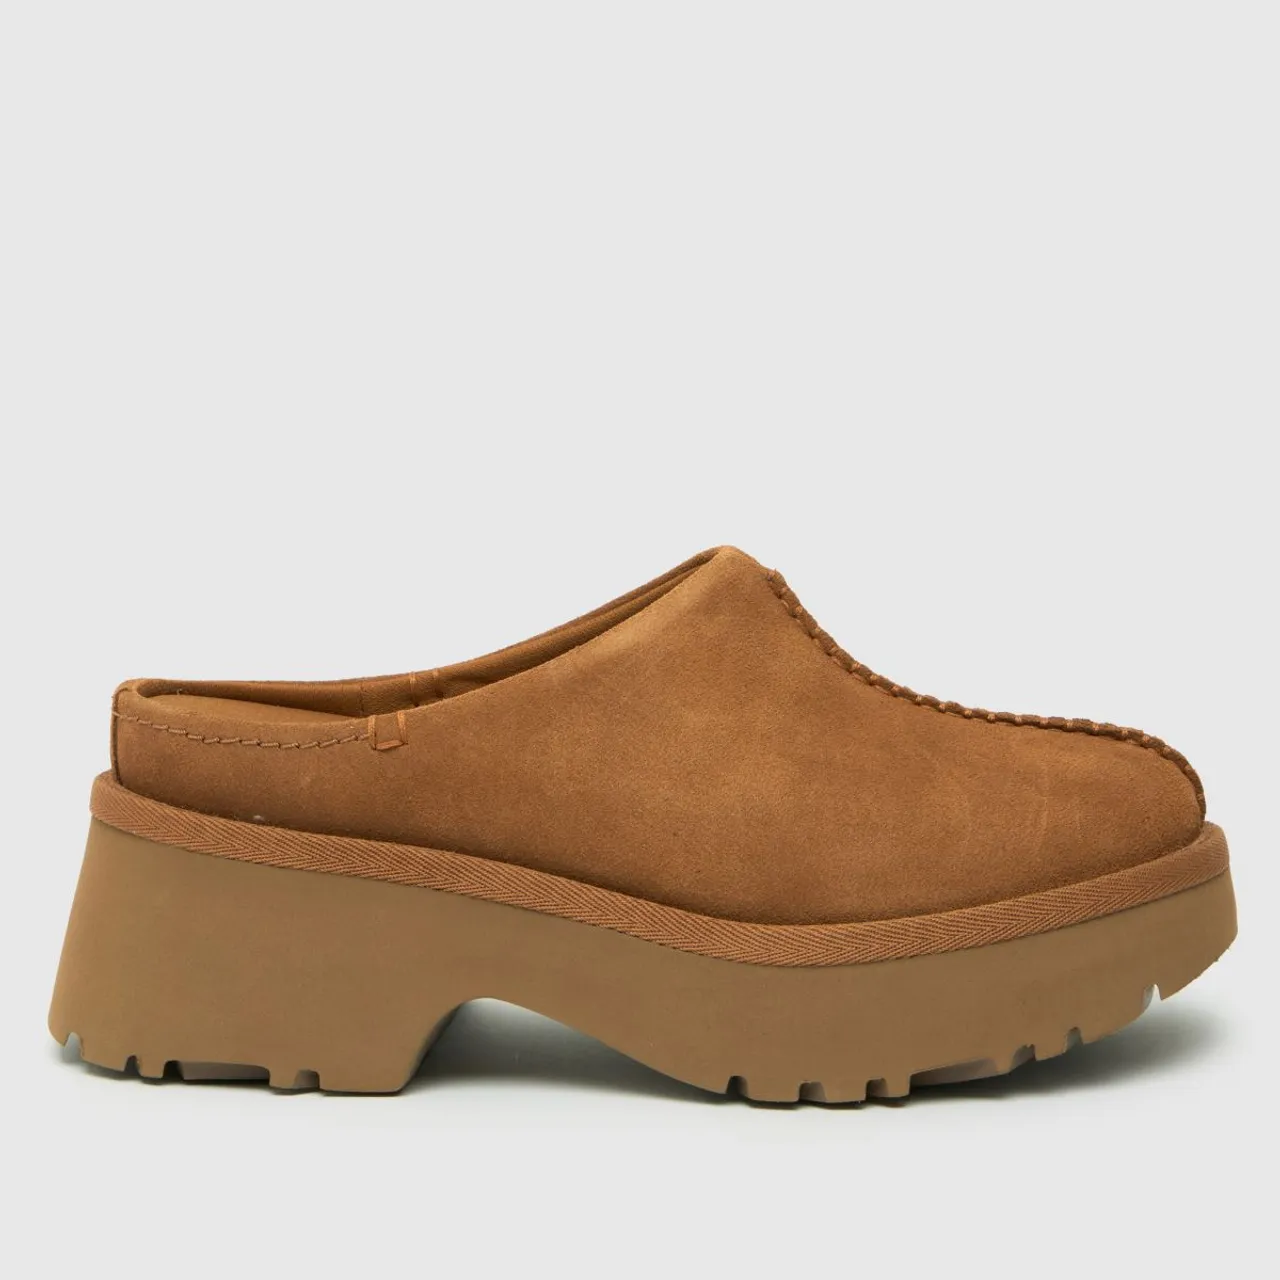 Ugg new Heights Clog Sandals in Chestnut